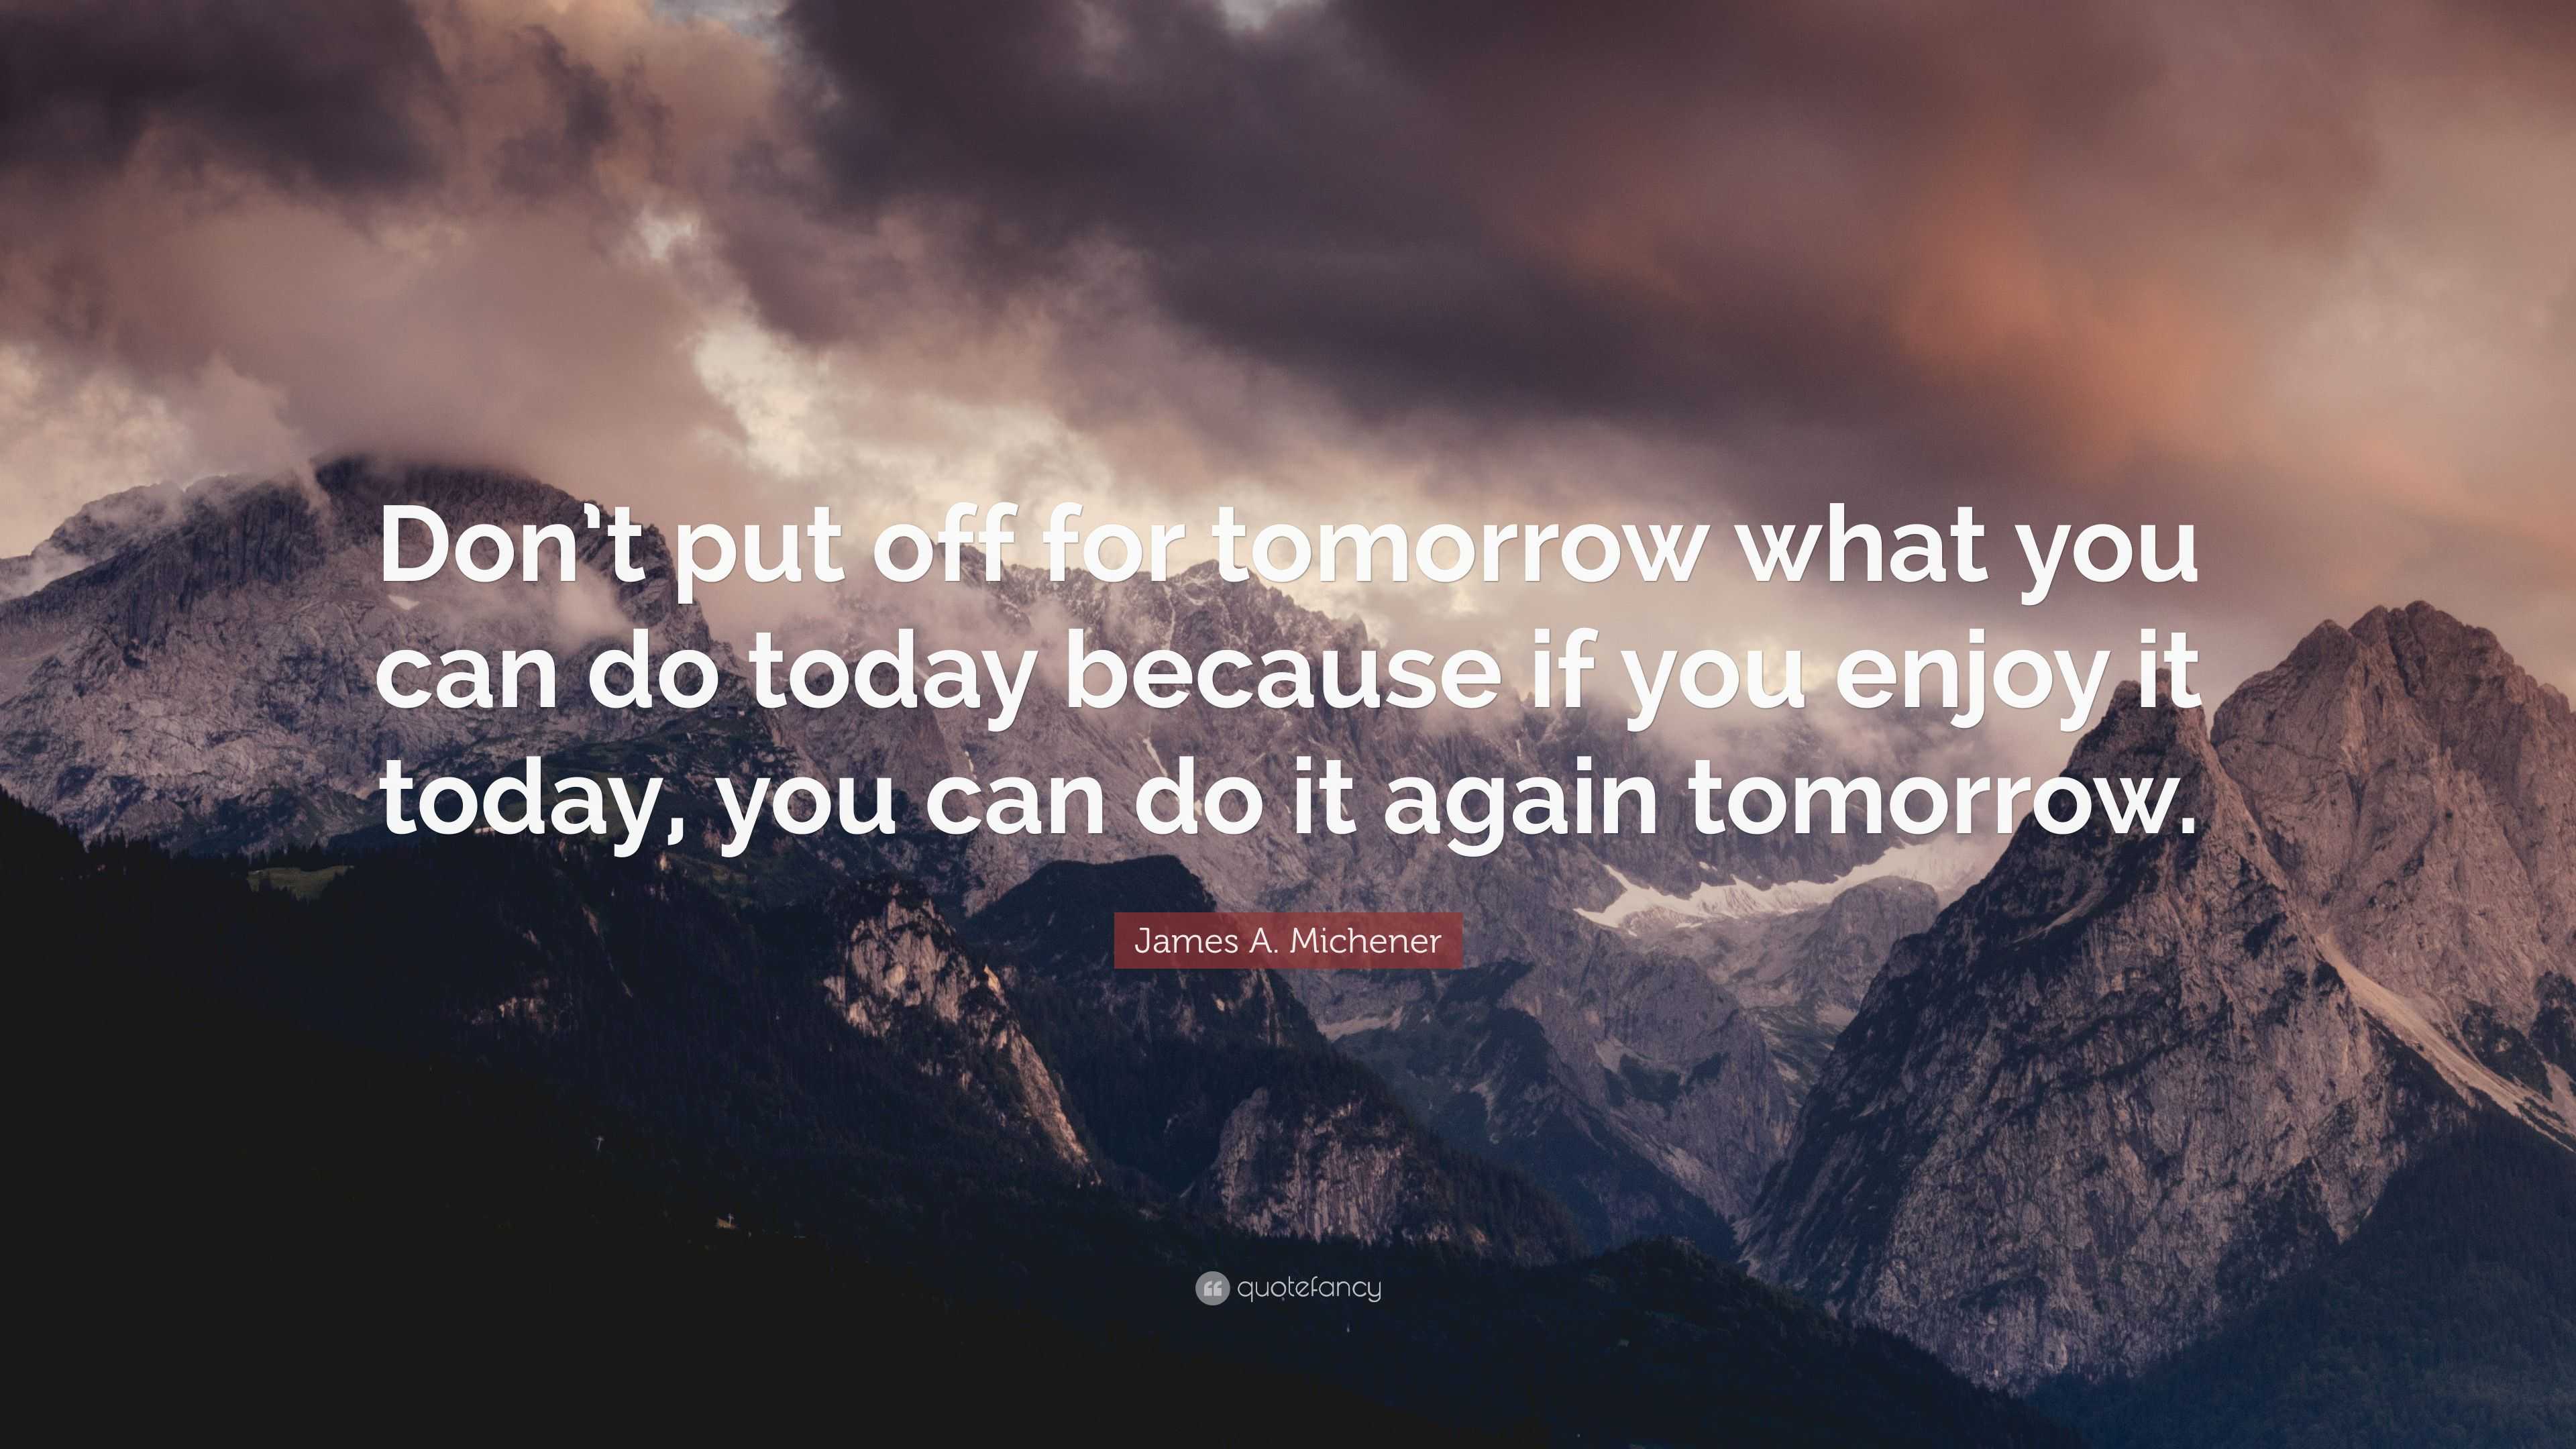 James A. Michener Quote: “Don’t put off for tomorrow what you can do ...